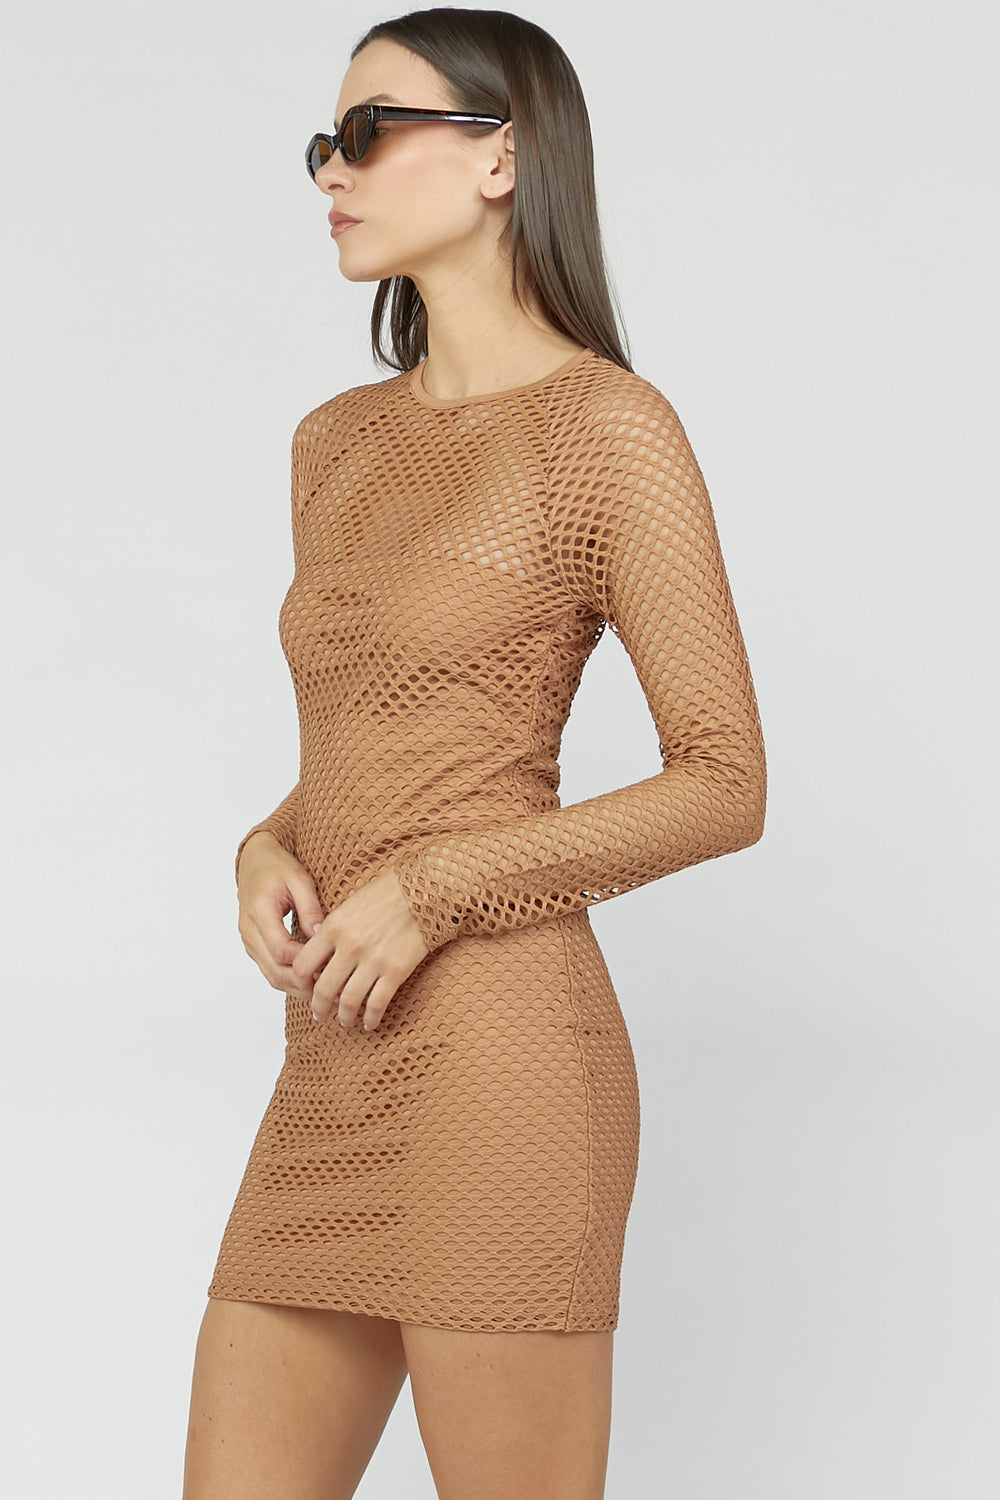 Netted Mesh Long Sleeves Bodycon Dress Taupe